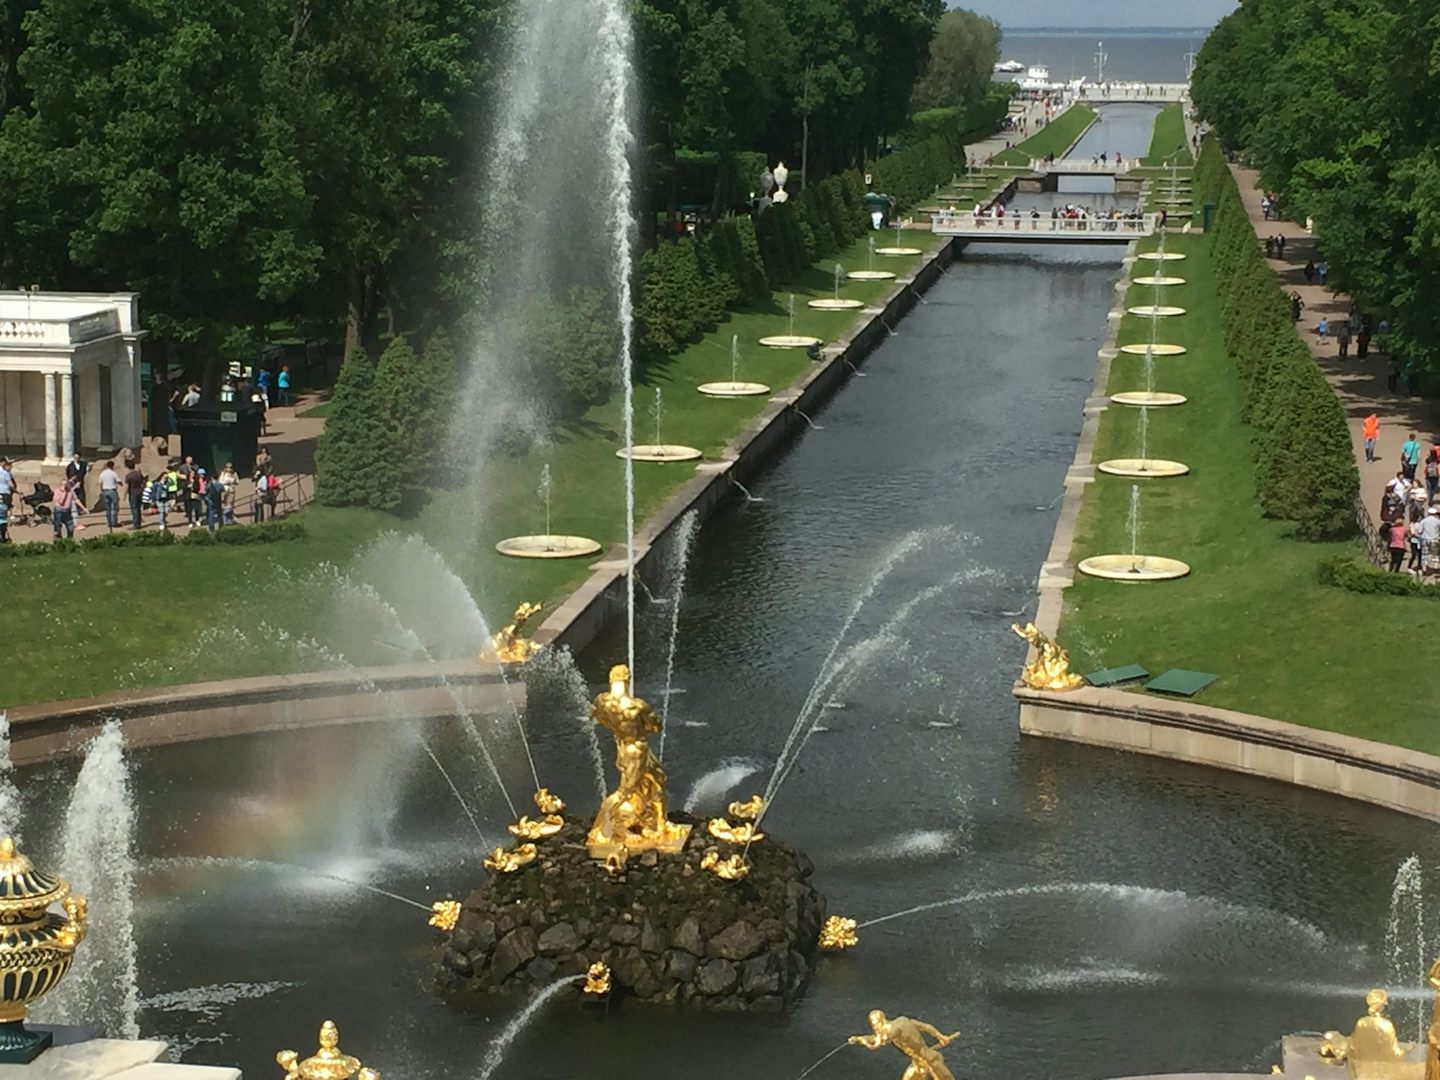 Peter the Great's Summer Palace with fountains (with no pumps)